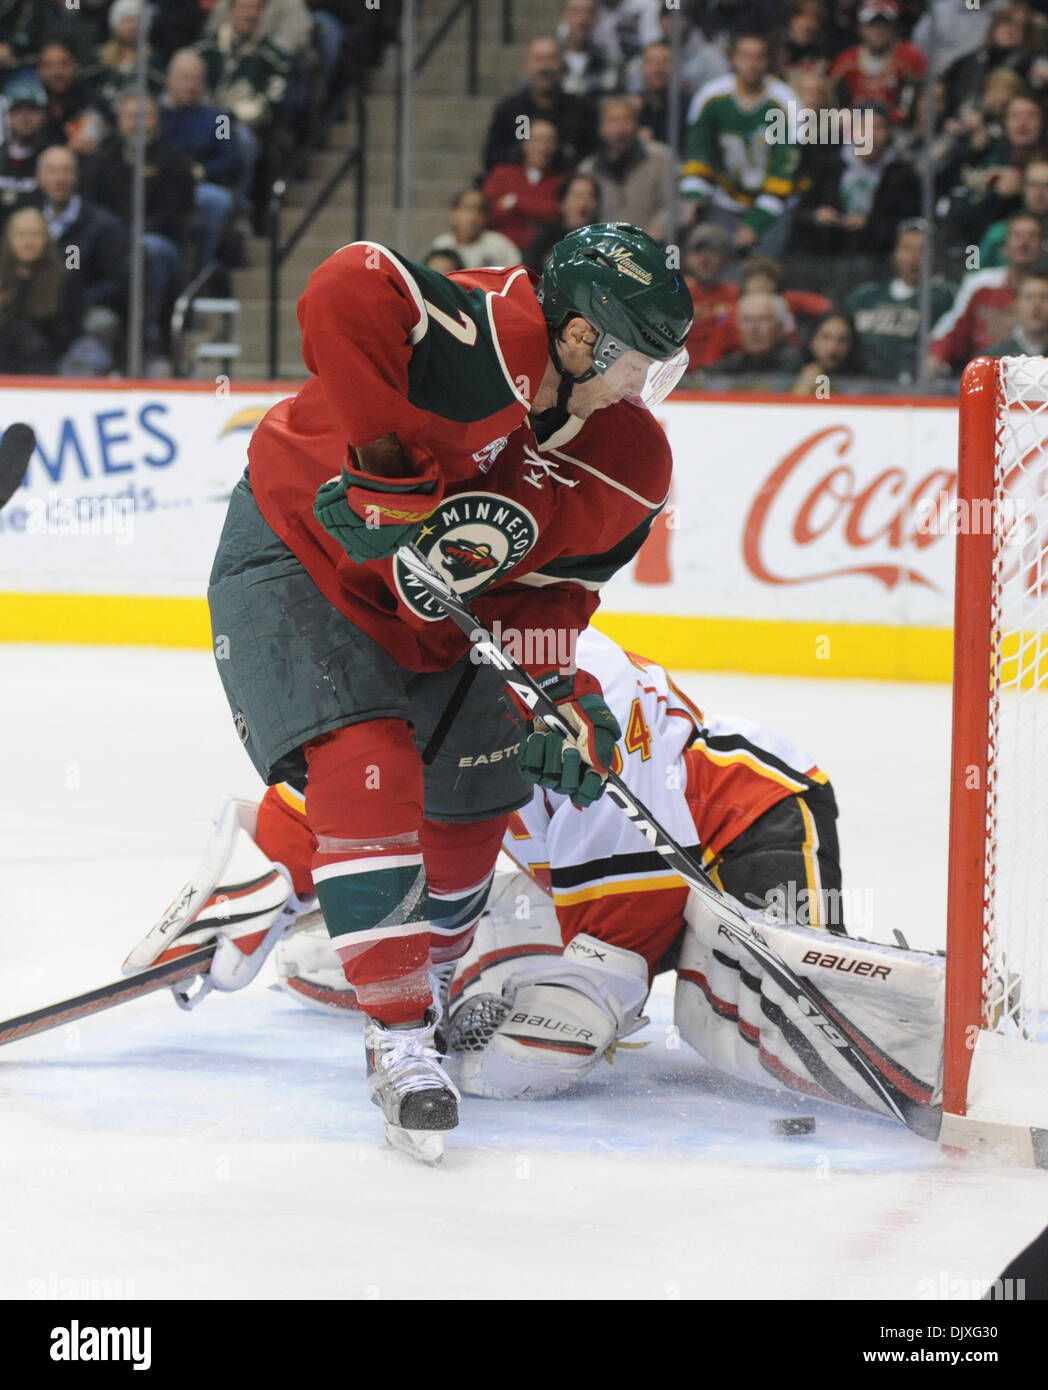 Nov. 5, 2010 - Minneapolis, Minnesota, United States of America - Minnesota Wild center Matt Cullen (#7) continues to work the puck at the toe of the goalie as center Kyle Brodziak (#21) looks for a rebound in the first period of the game between the Calgary Flames and the Minnesota Wild at Xcel Energy Center in St. Paul, Minnesota.  The Wild are tied 1-1 with the Flames after one  Stock Photo